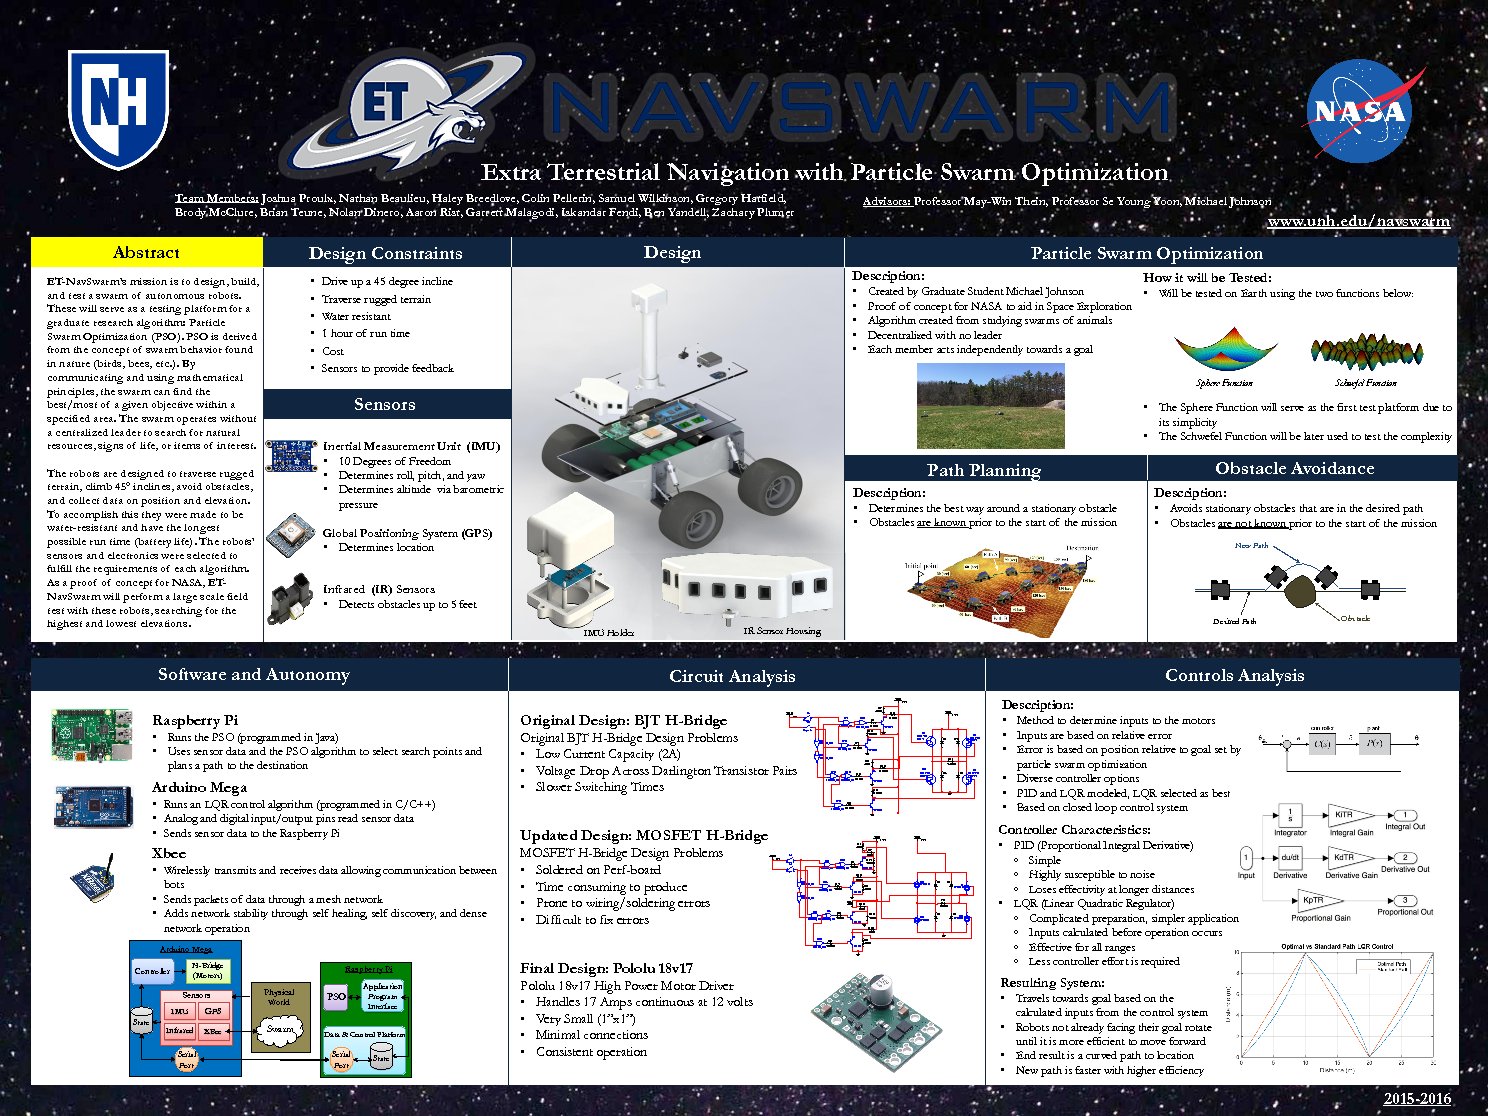 Extraterrestrial Navigation With Particle Swarm Optimization (Et-Navswarm) by JoshProulx